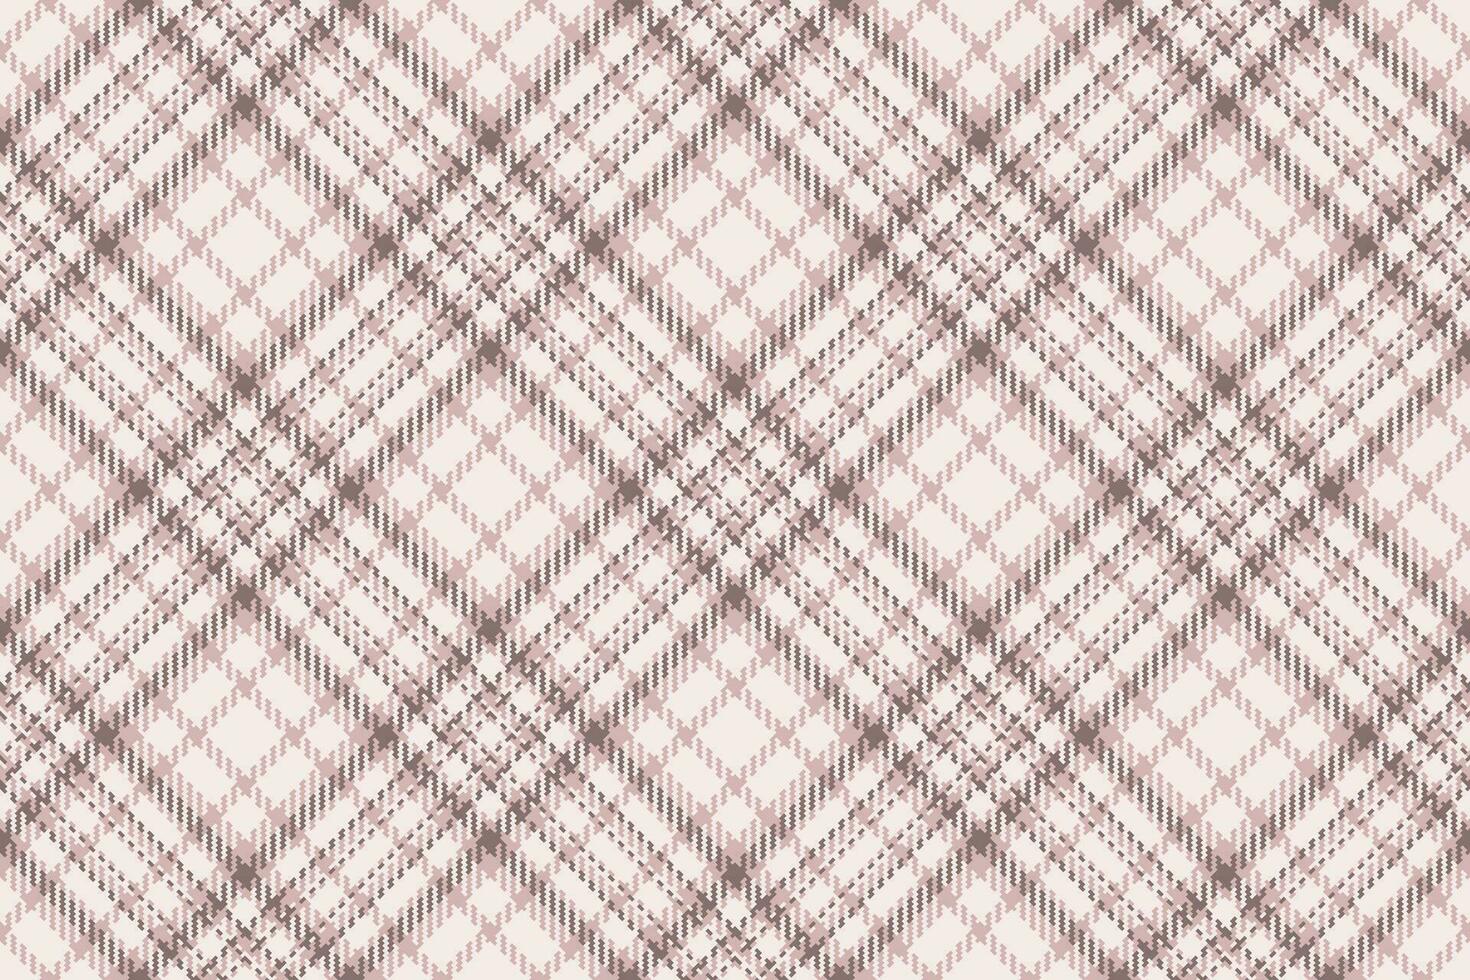 Plaid texture check of pattern tartan textile with a seamless background vector fabric.